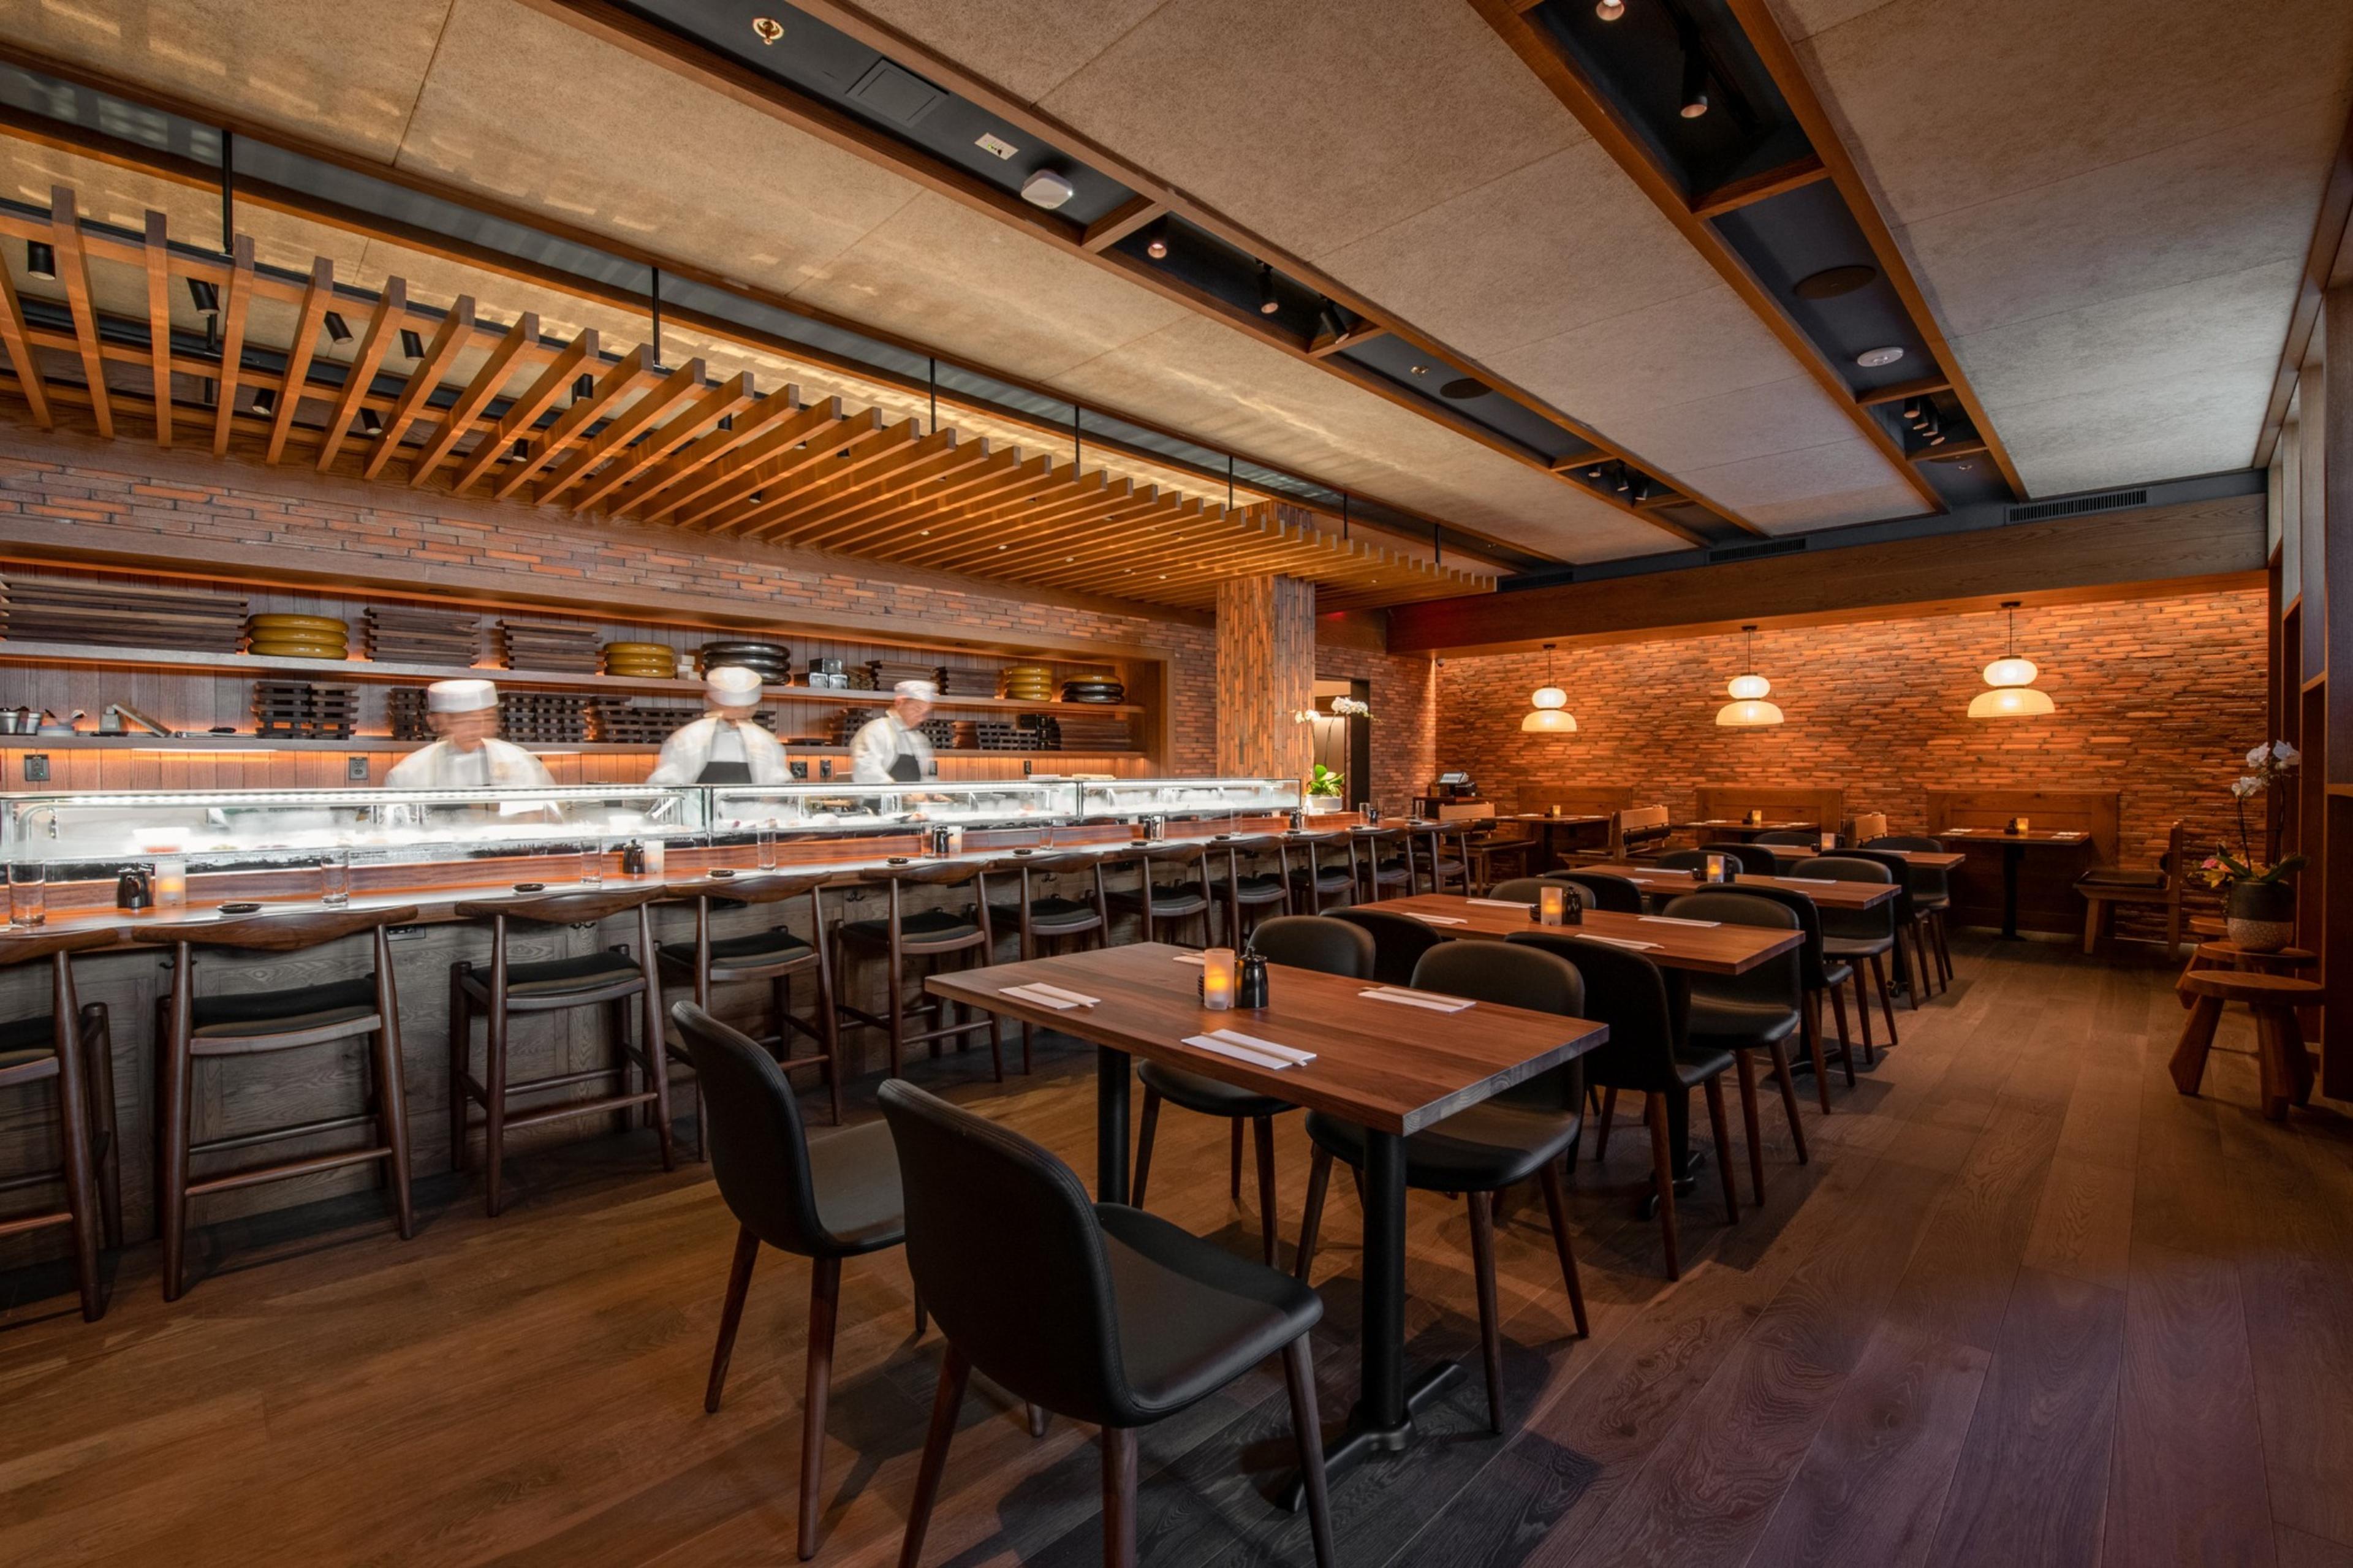 Blue Ribbon Brasserie, Now Open - Boston Restaurant News and Events